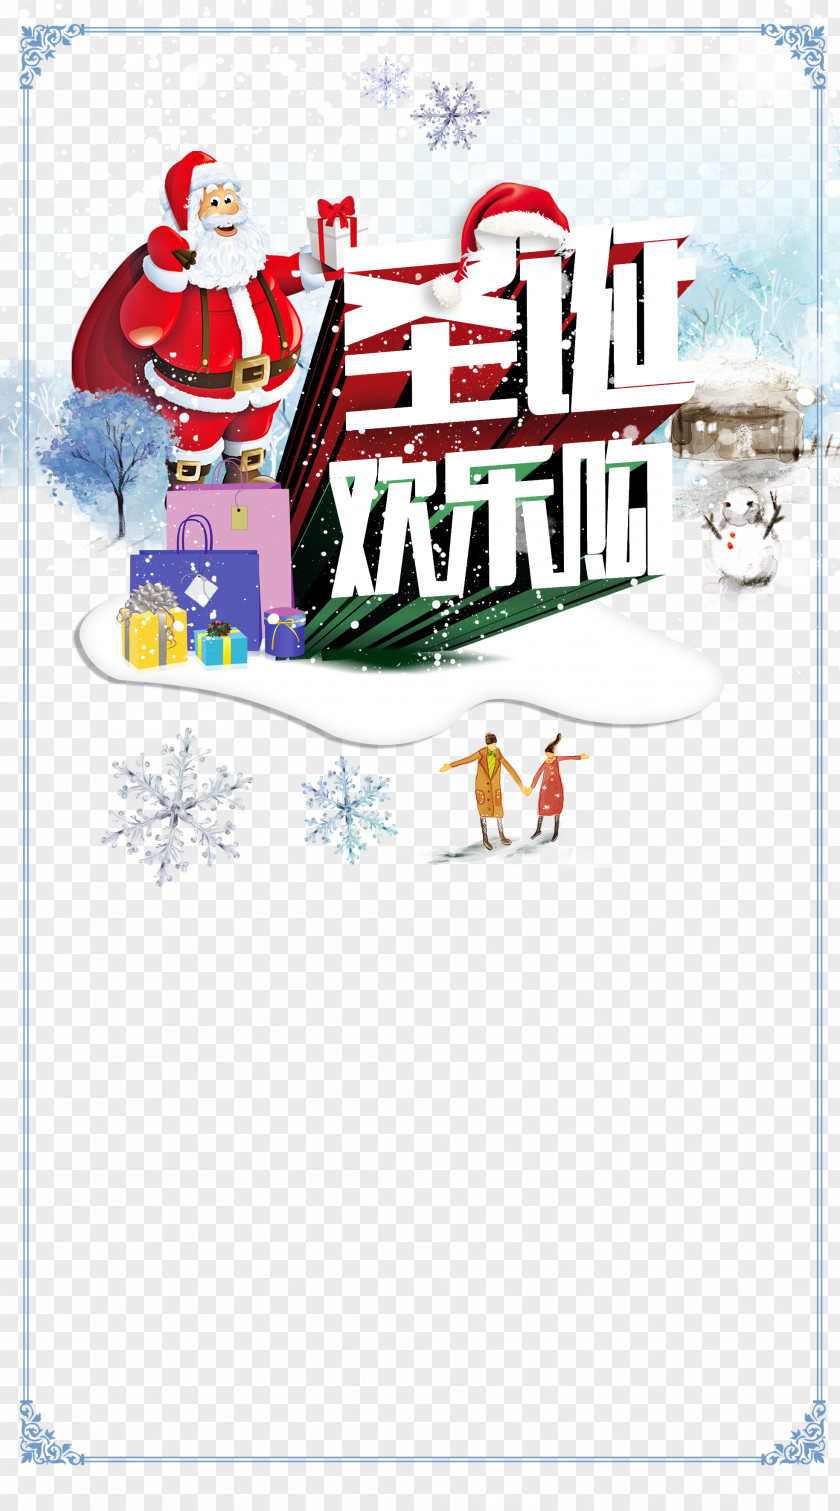 Christmas Shopping Carnival Aesthetic Background Poster Illustration PNG